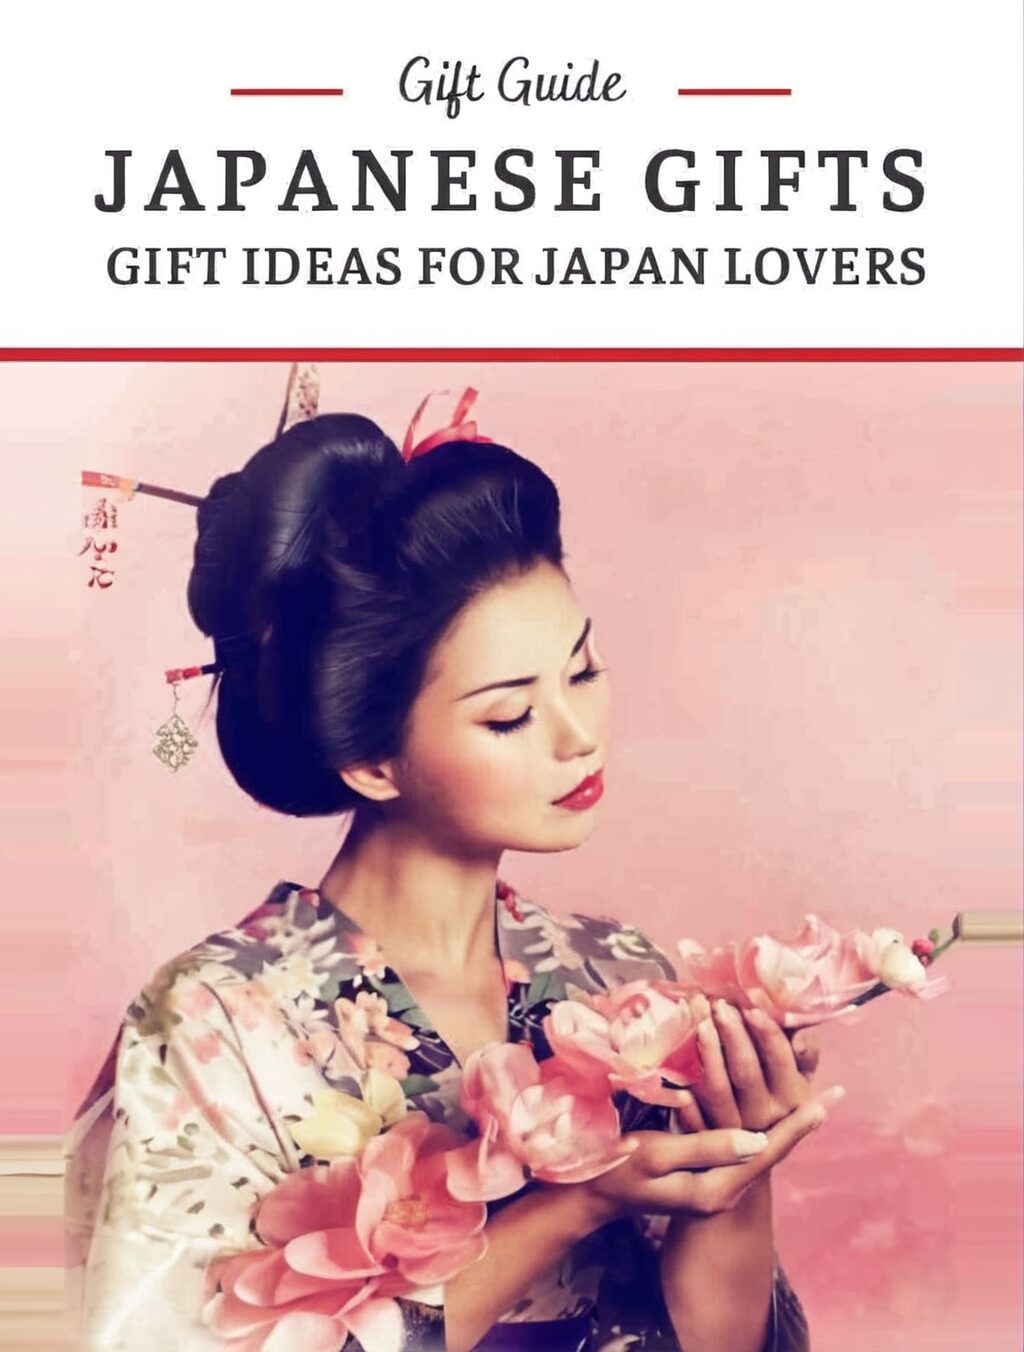 gifts in japanese language